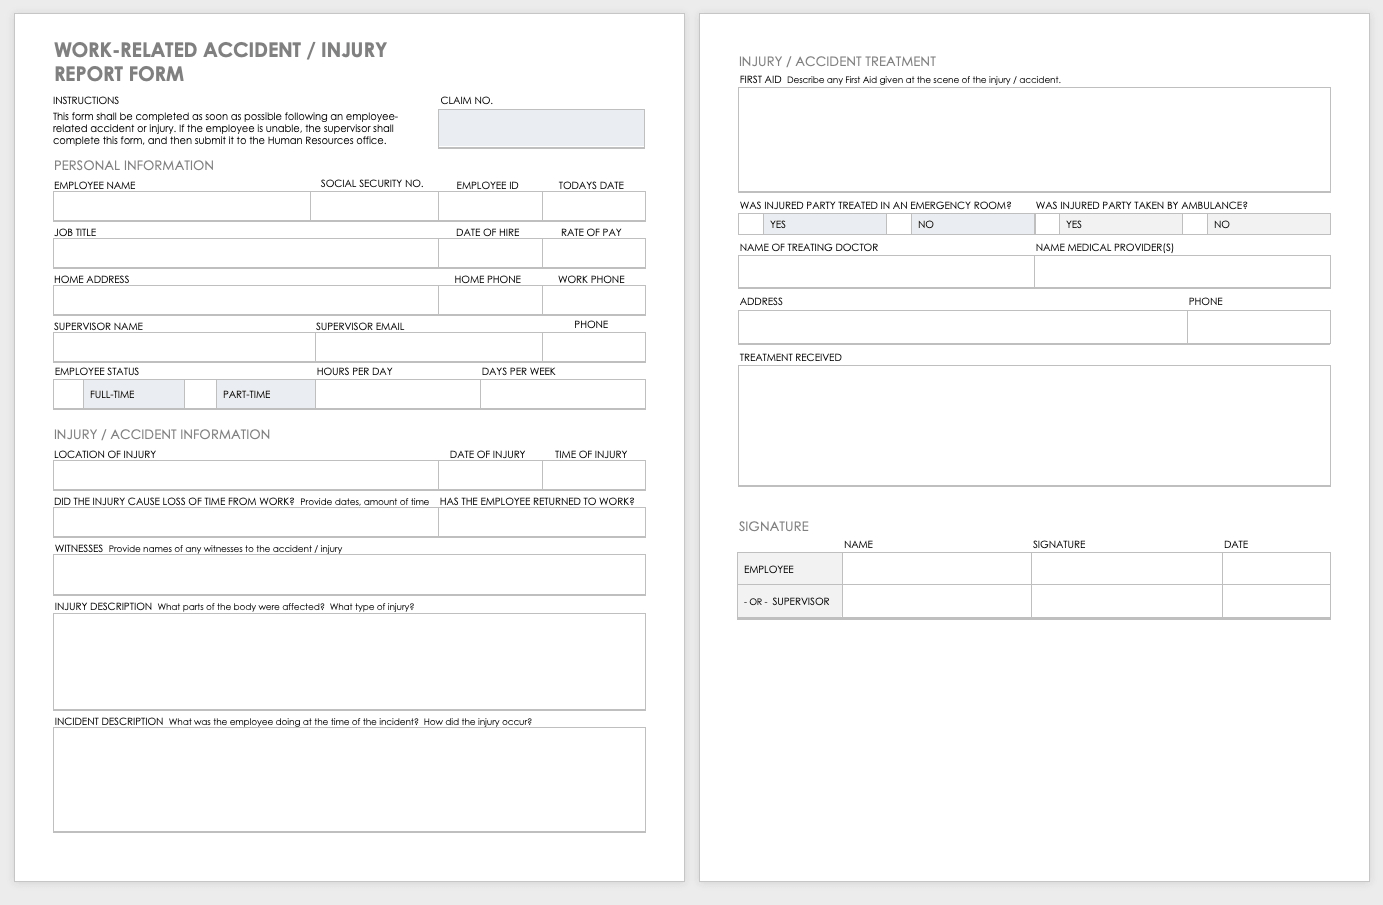 Free Workplace Accident Report Templates | Smartsheet With Regard To Health And Safety Incident Report Form Template